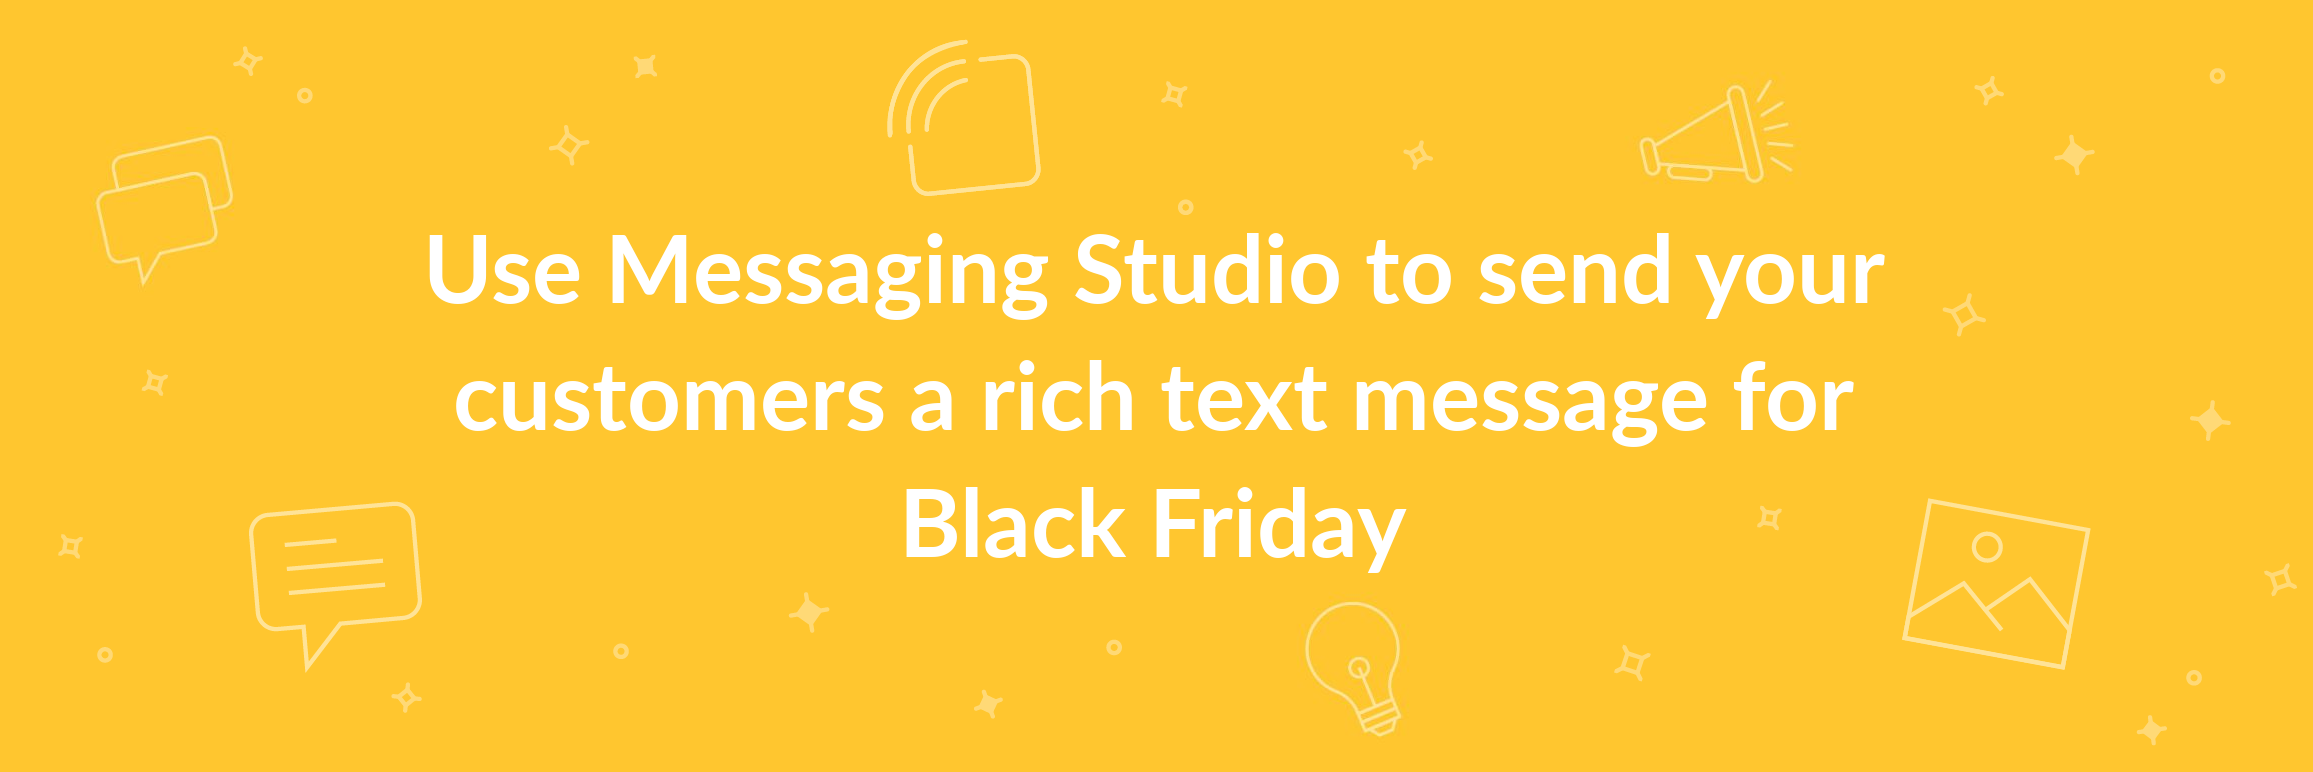 Send rich text messages for Black Friday header image